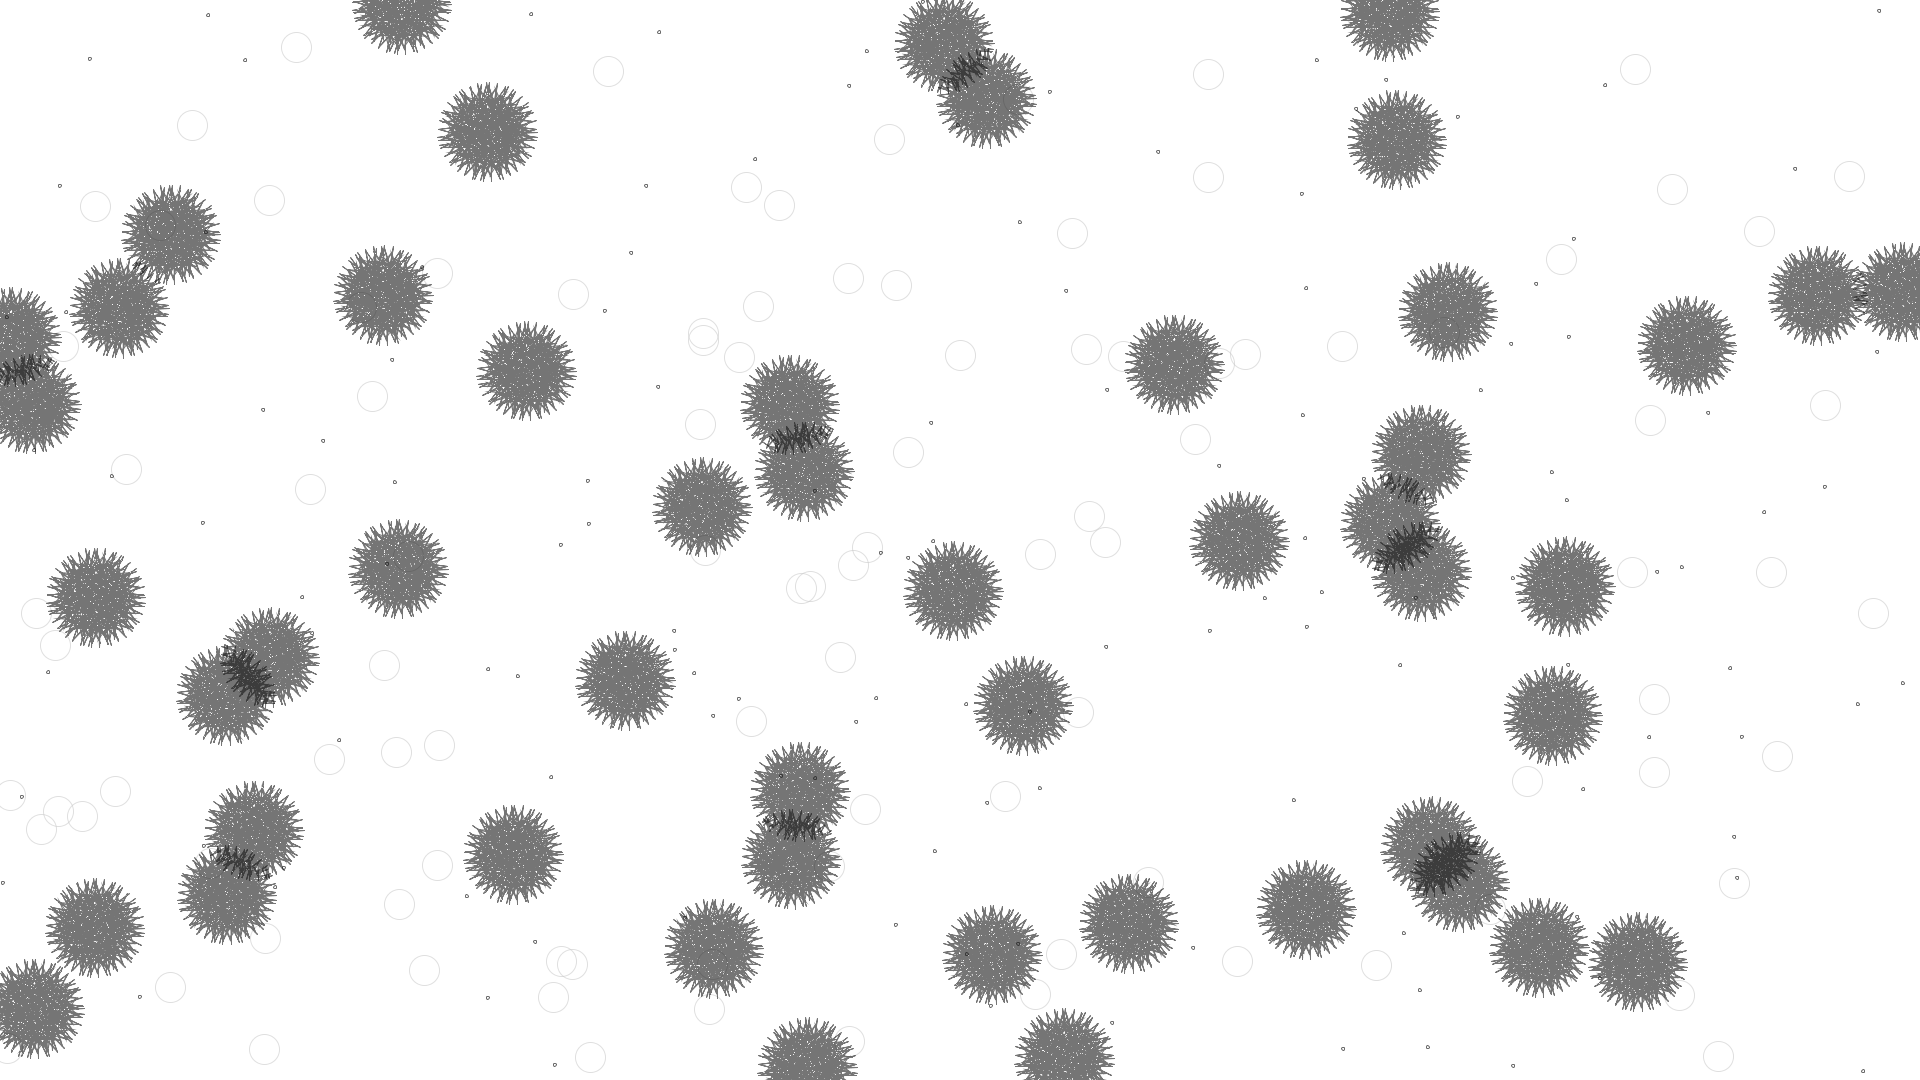 image which shows a procedurally generated image using processing, it contains a grey circles and hairy shapes sparsely spread out over a white background